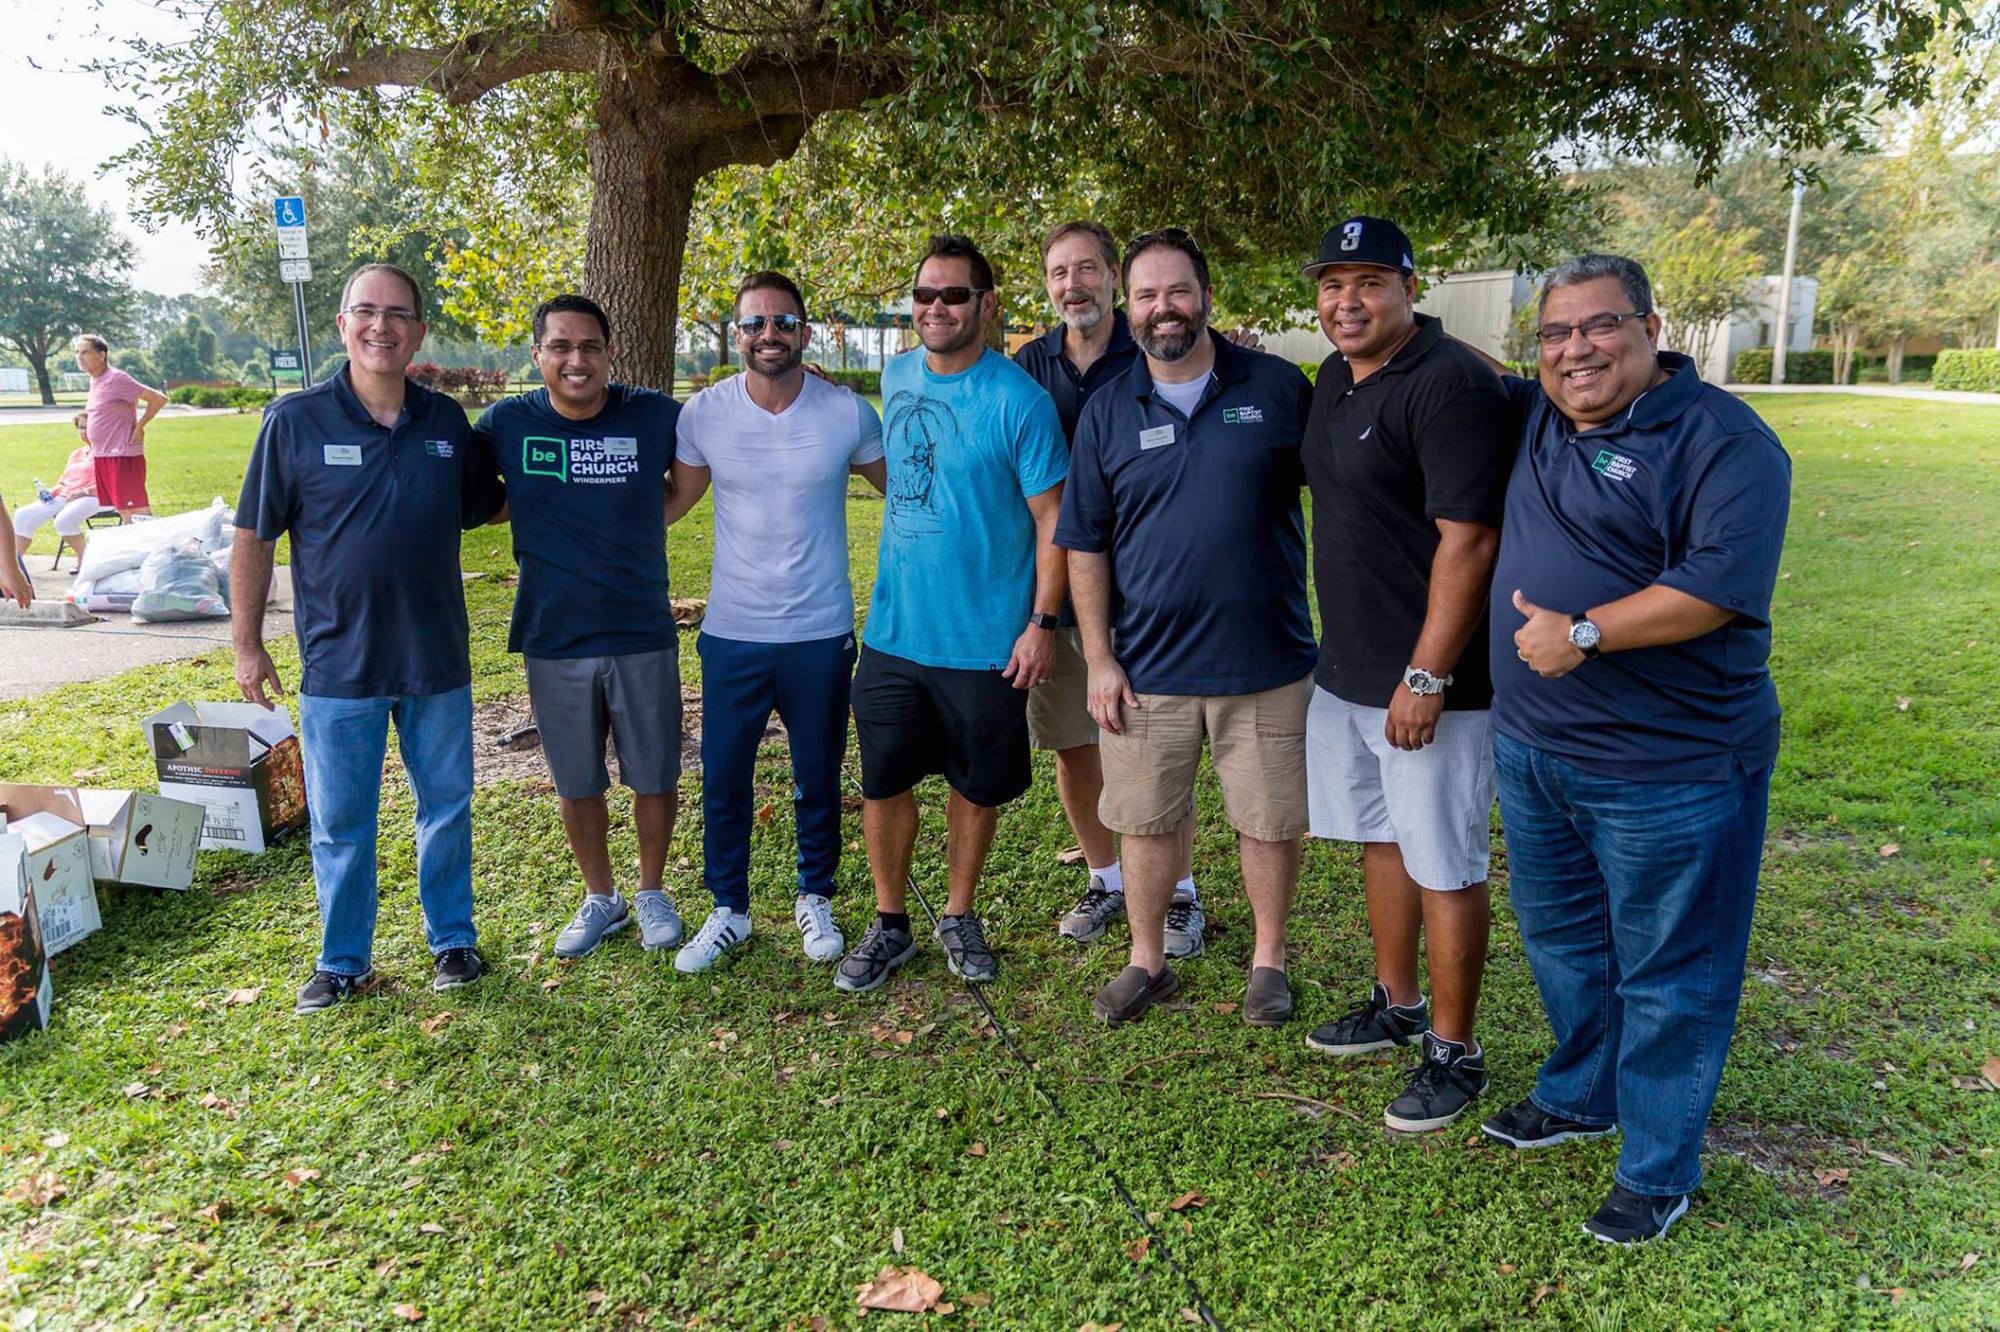 First Baptist Church Windermere pastors and church members pose with professional baseball players who made an appearance at the church’s donation drive for supplies for Puerto Rico.